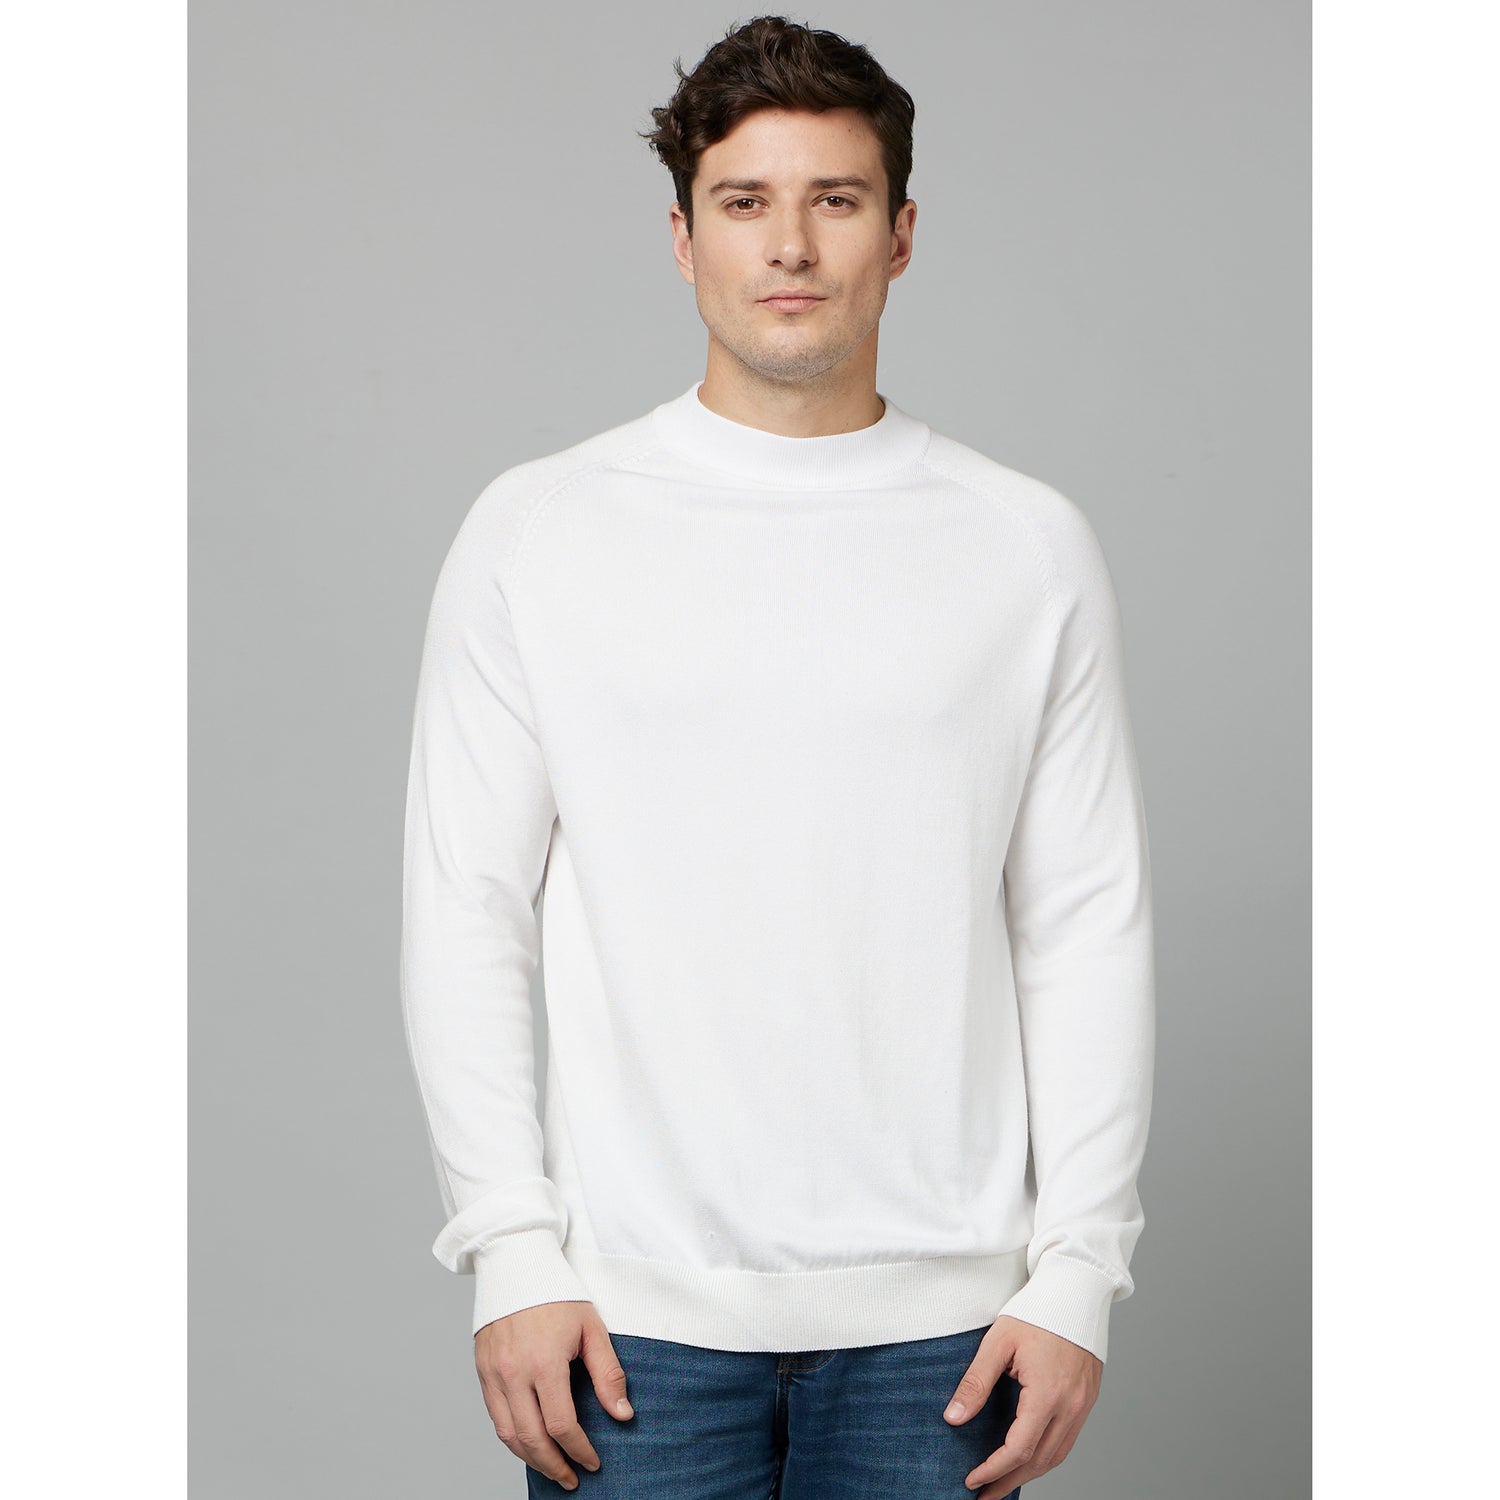 Off White Long Sleeve Cotton Pullover Sweater (FEHIGH)